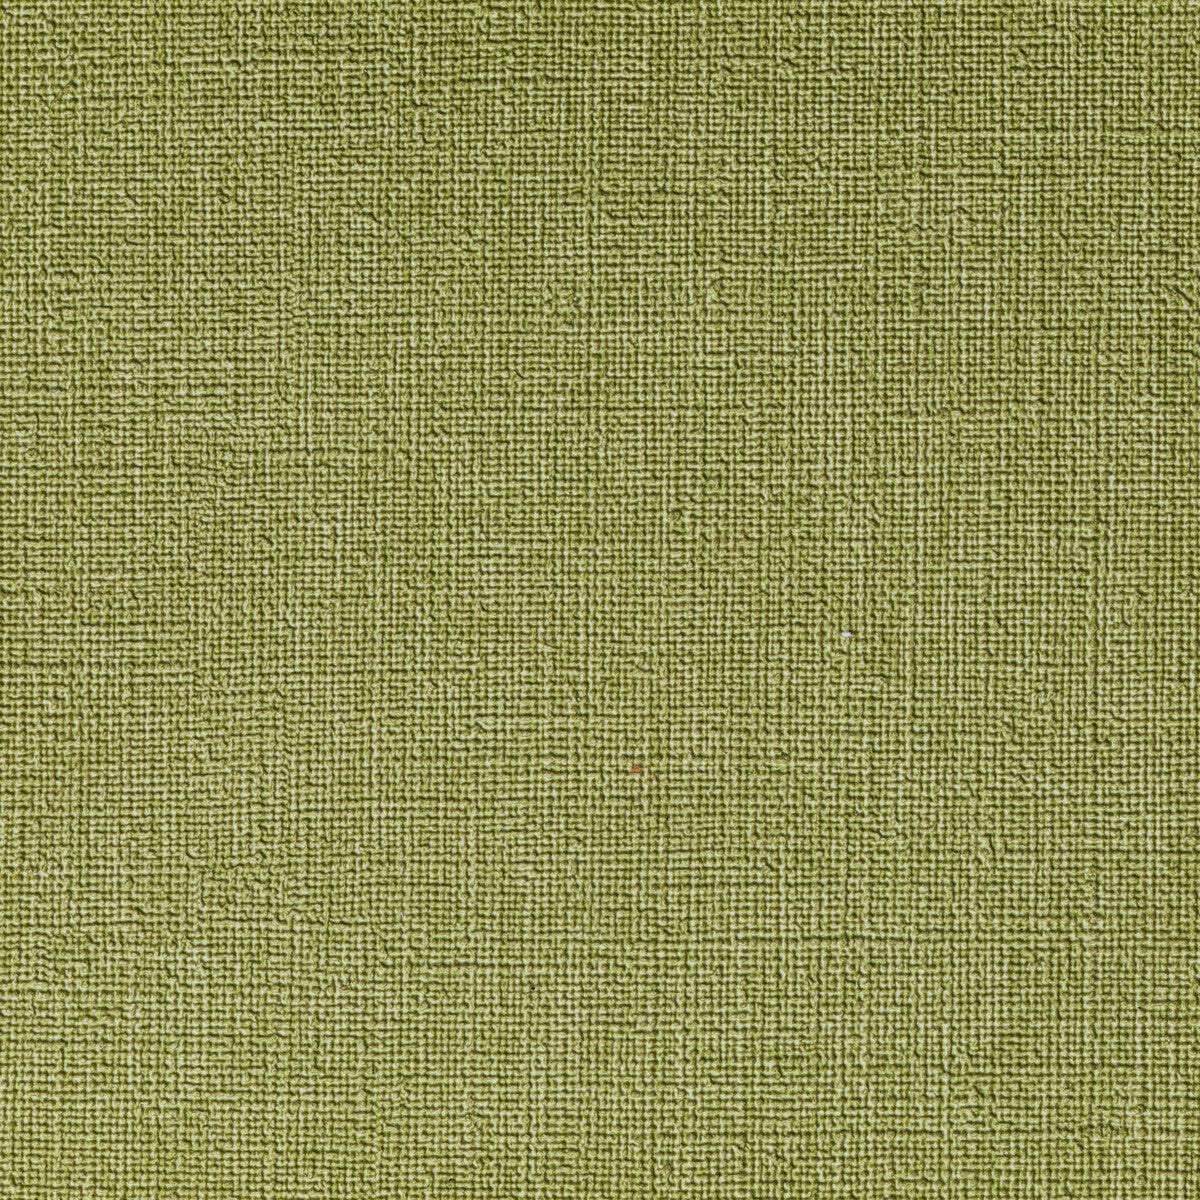 Caslin fabric in meadow color - pattern CASLIN.123.0 - by Kravet Contract in the Foundations / Value collection